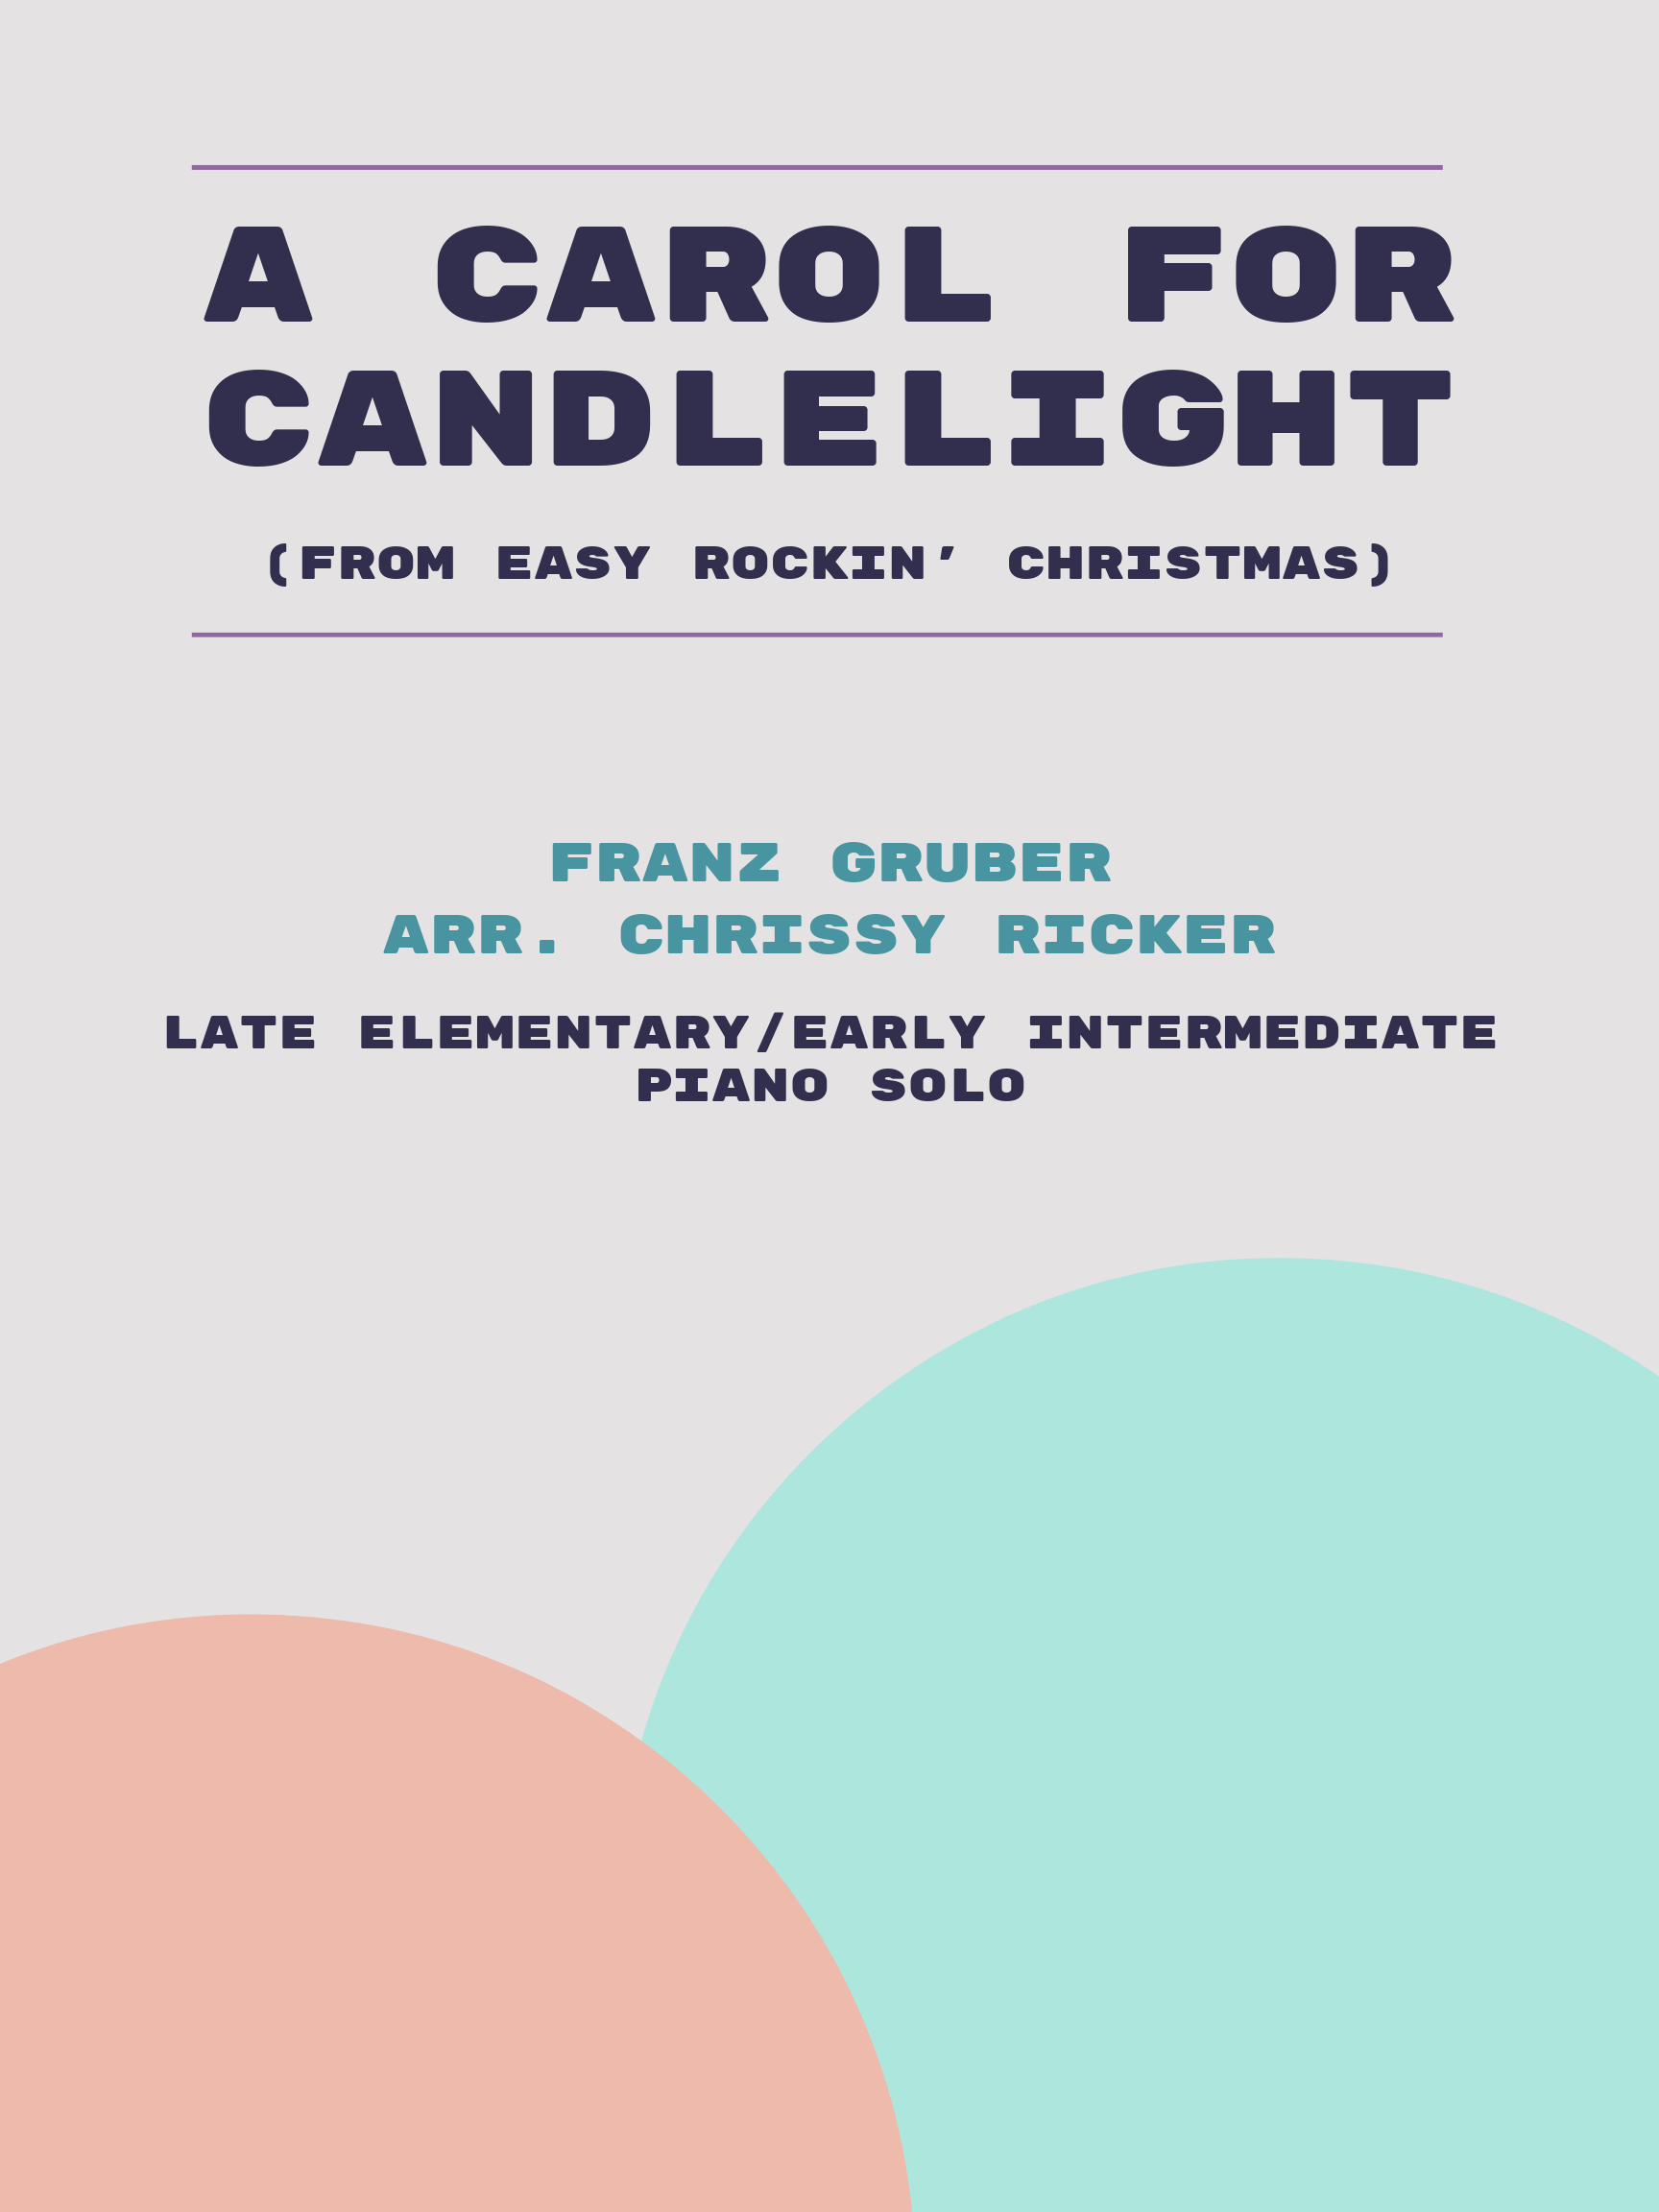 A Carol for Candlelight Sample Page